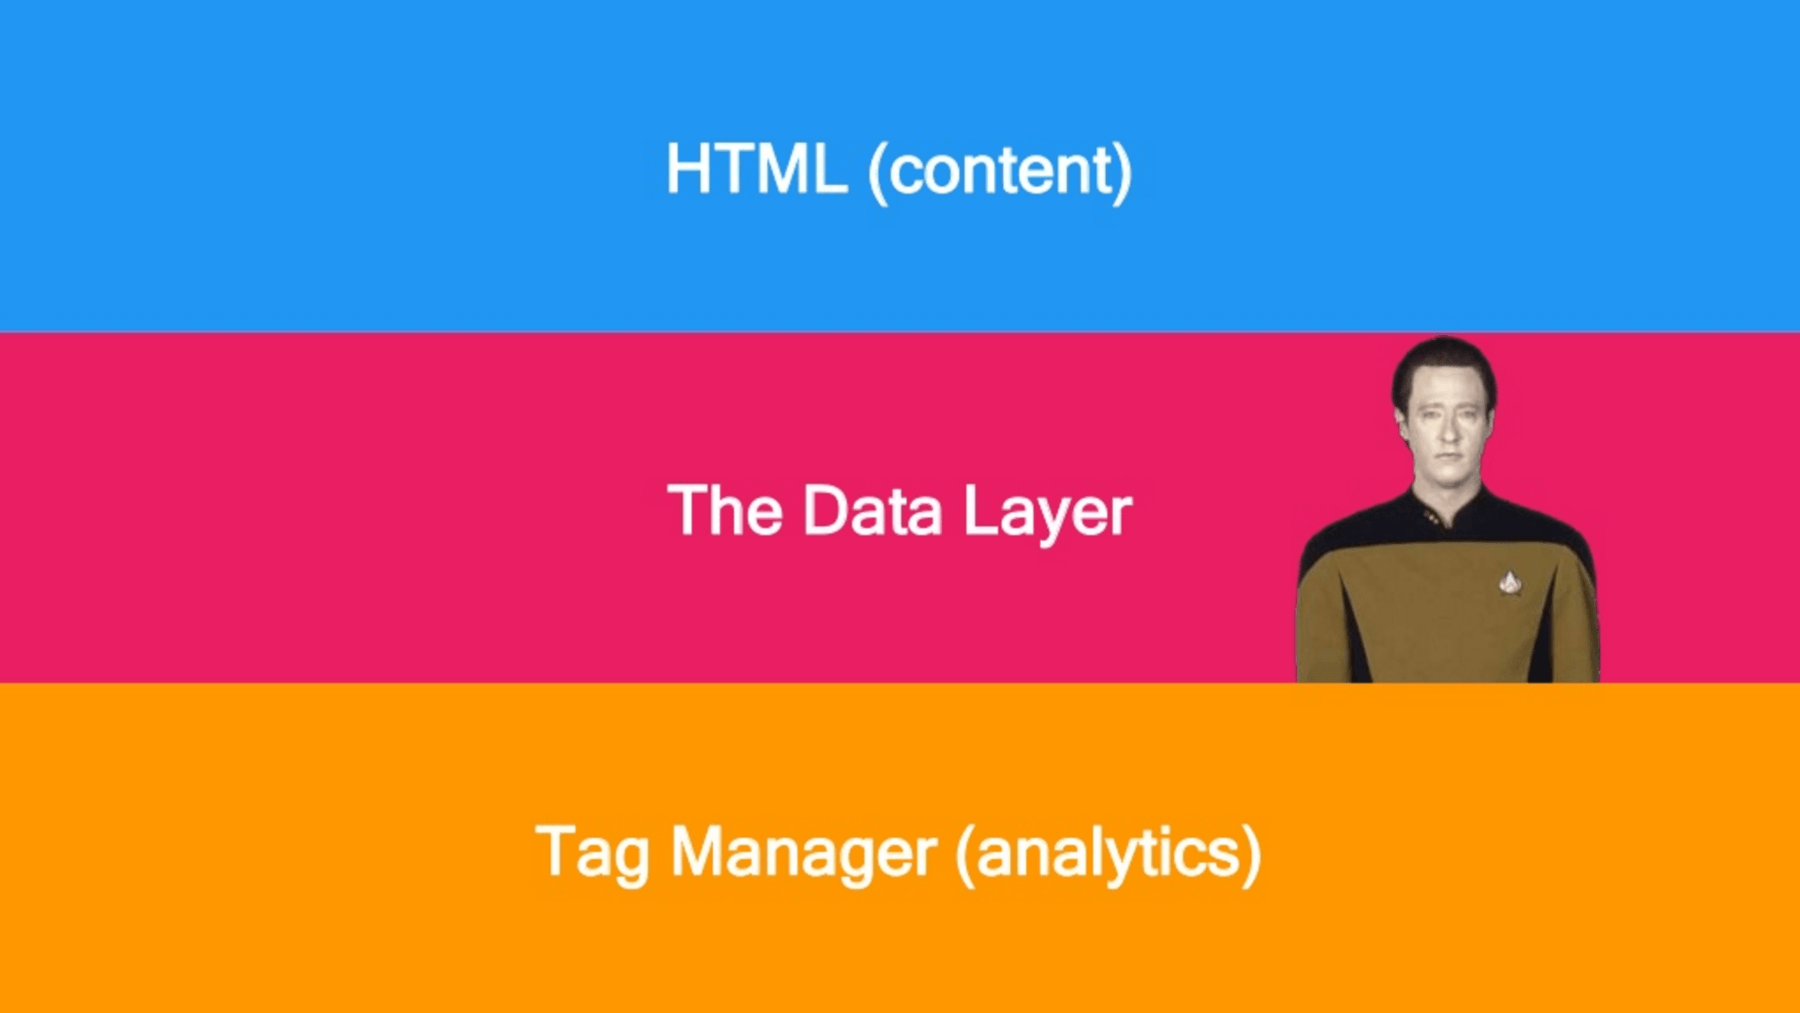 Three data layers of a website